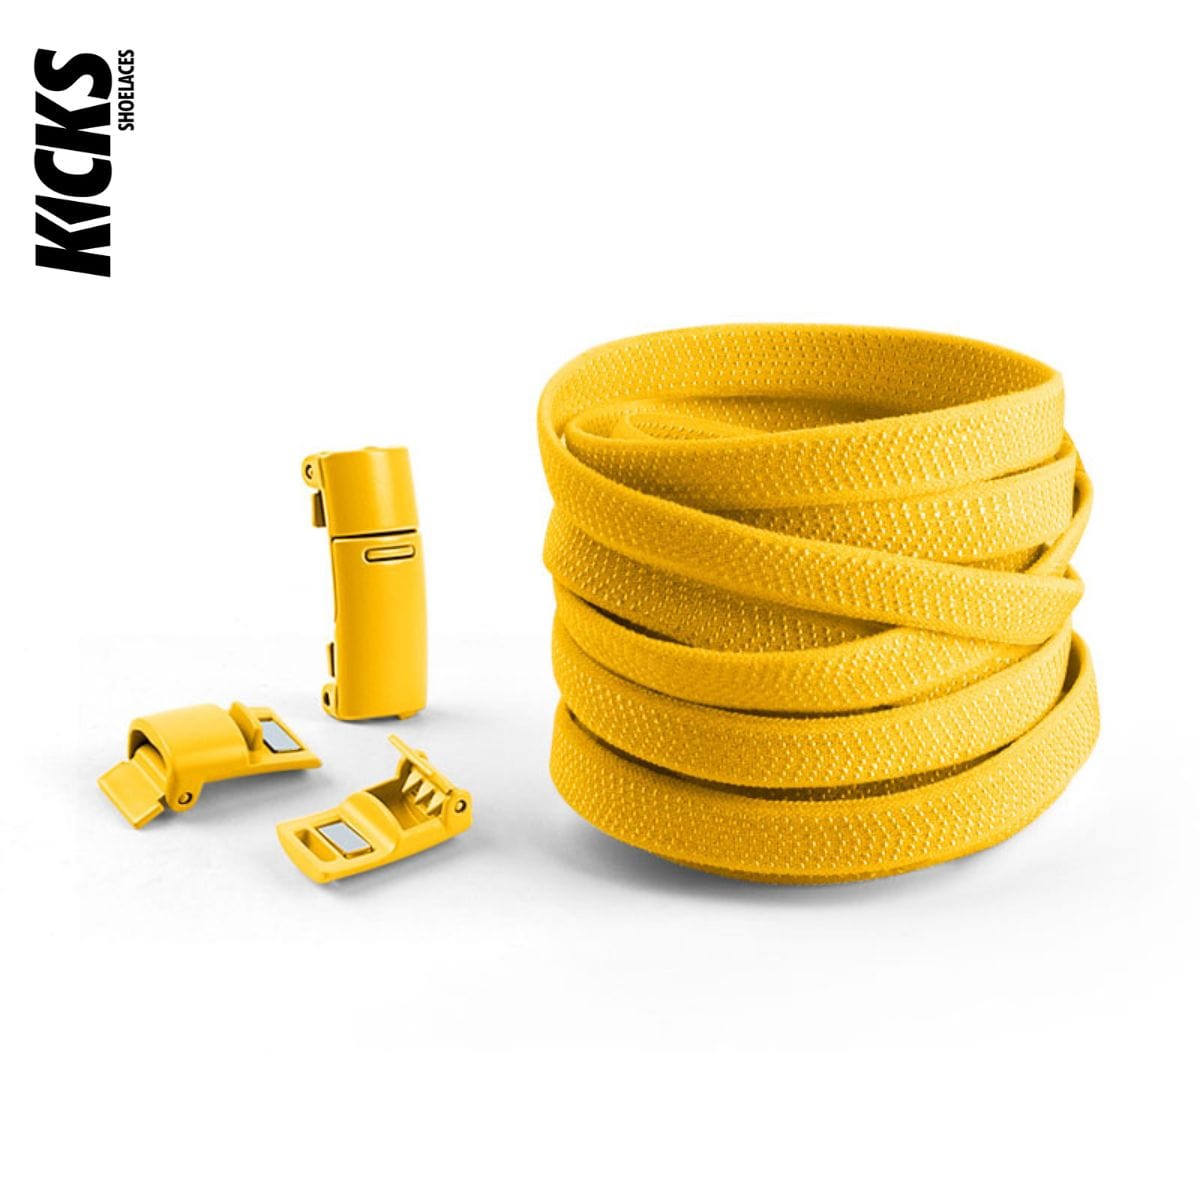 Yellow No-Tie Shoelaces with Magnetic Locks - Kicks Shoelaces